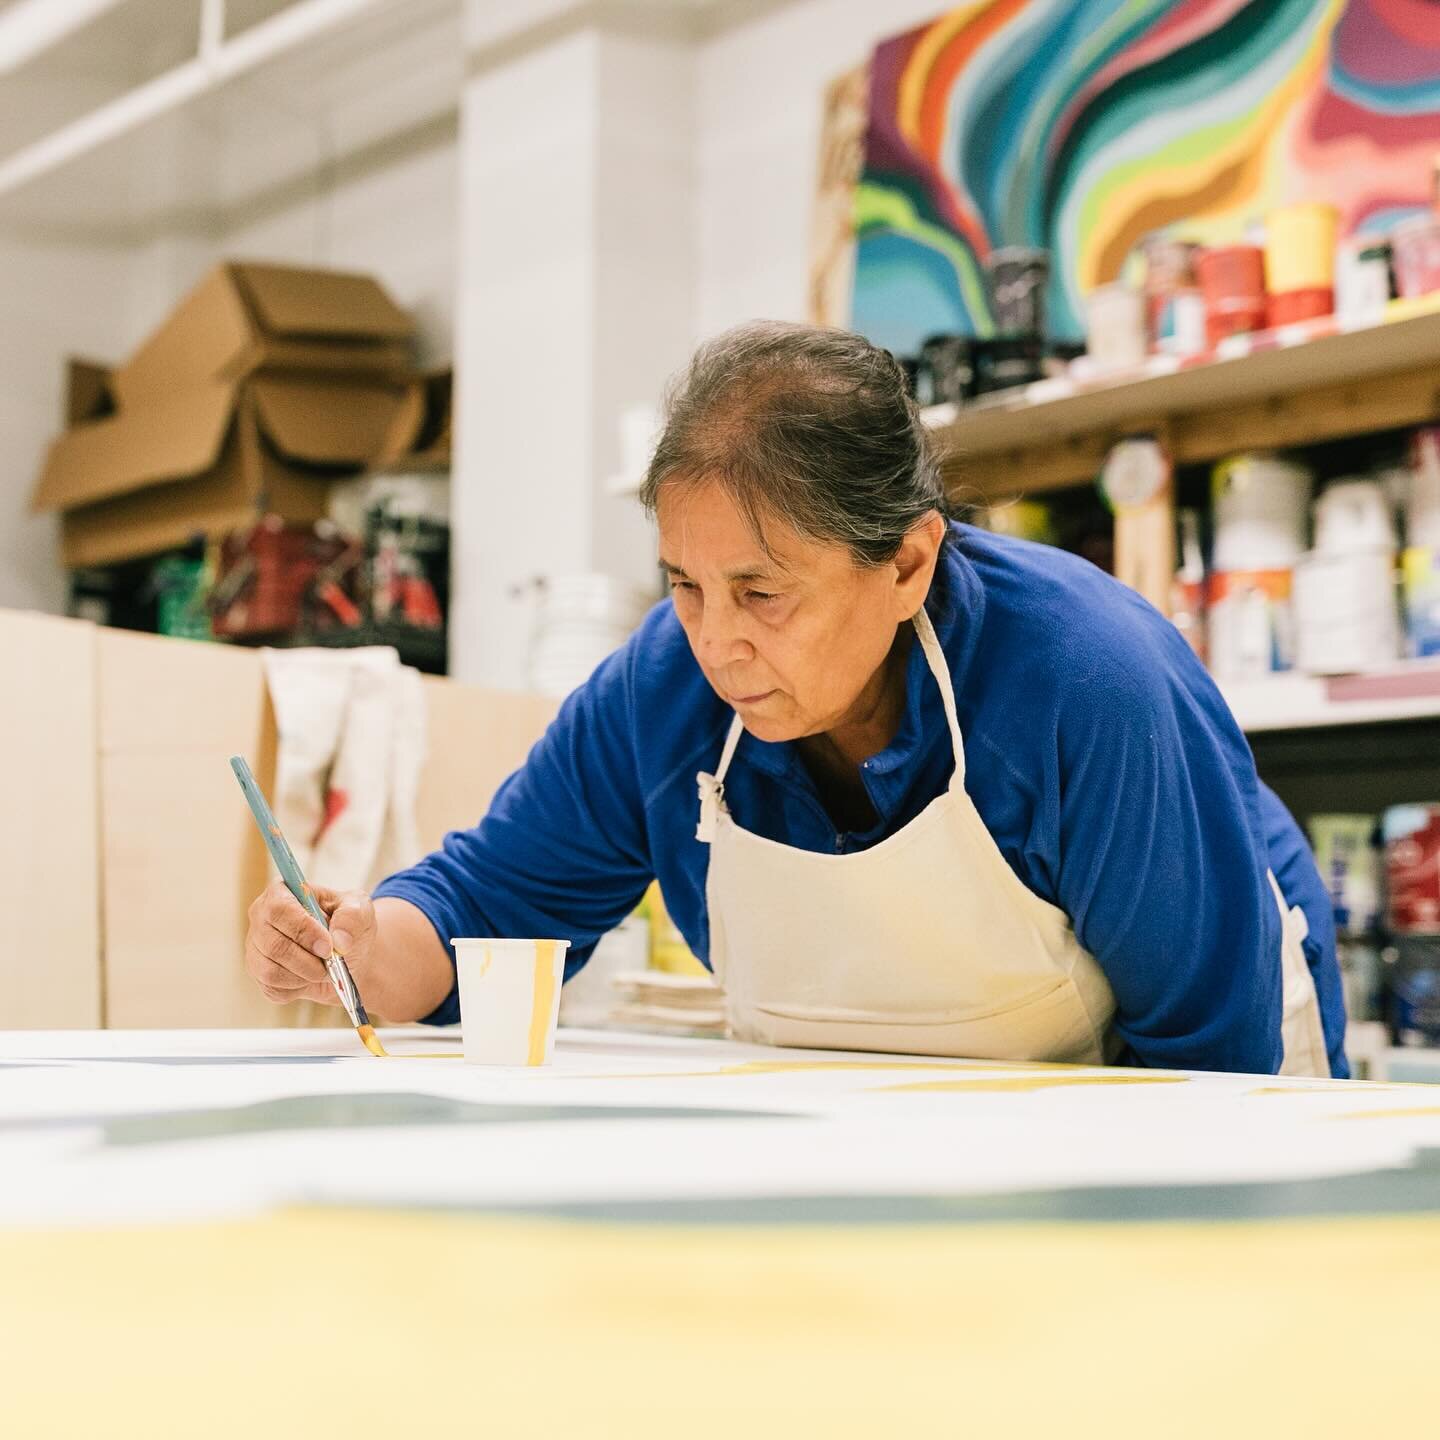 I love full circle moments! When I first moved back to Seattle, I worked at Chief Seattle Club @chiefseattleclub and met Denise Emerson @dineskok at a First Thursdays gallery. This past month, I had the honor of photographing Denise working on a mura